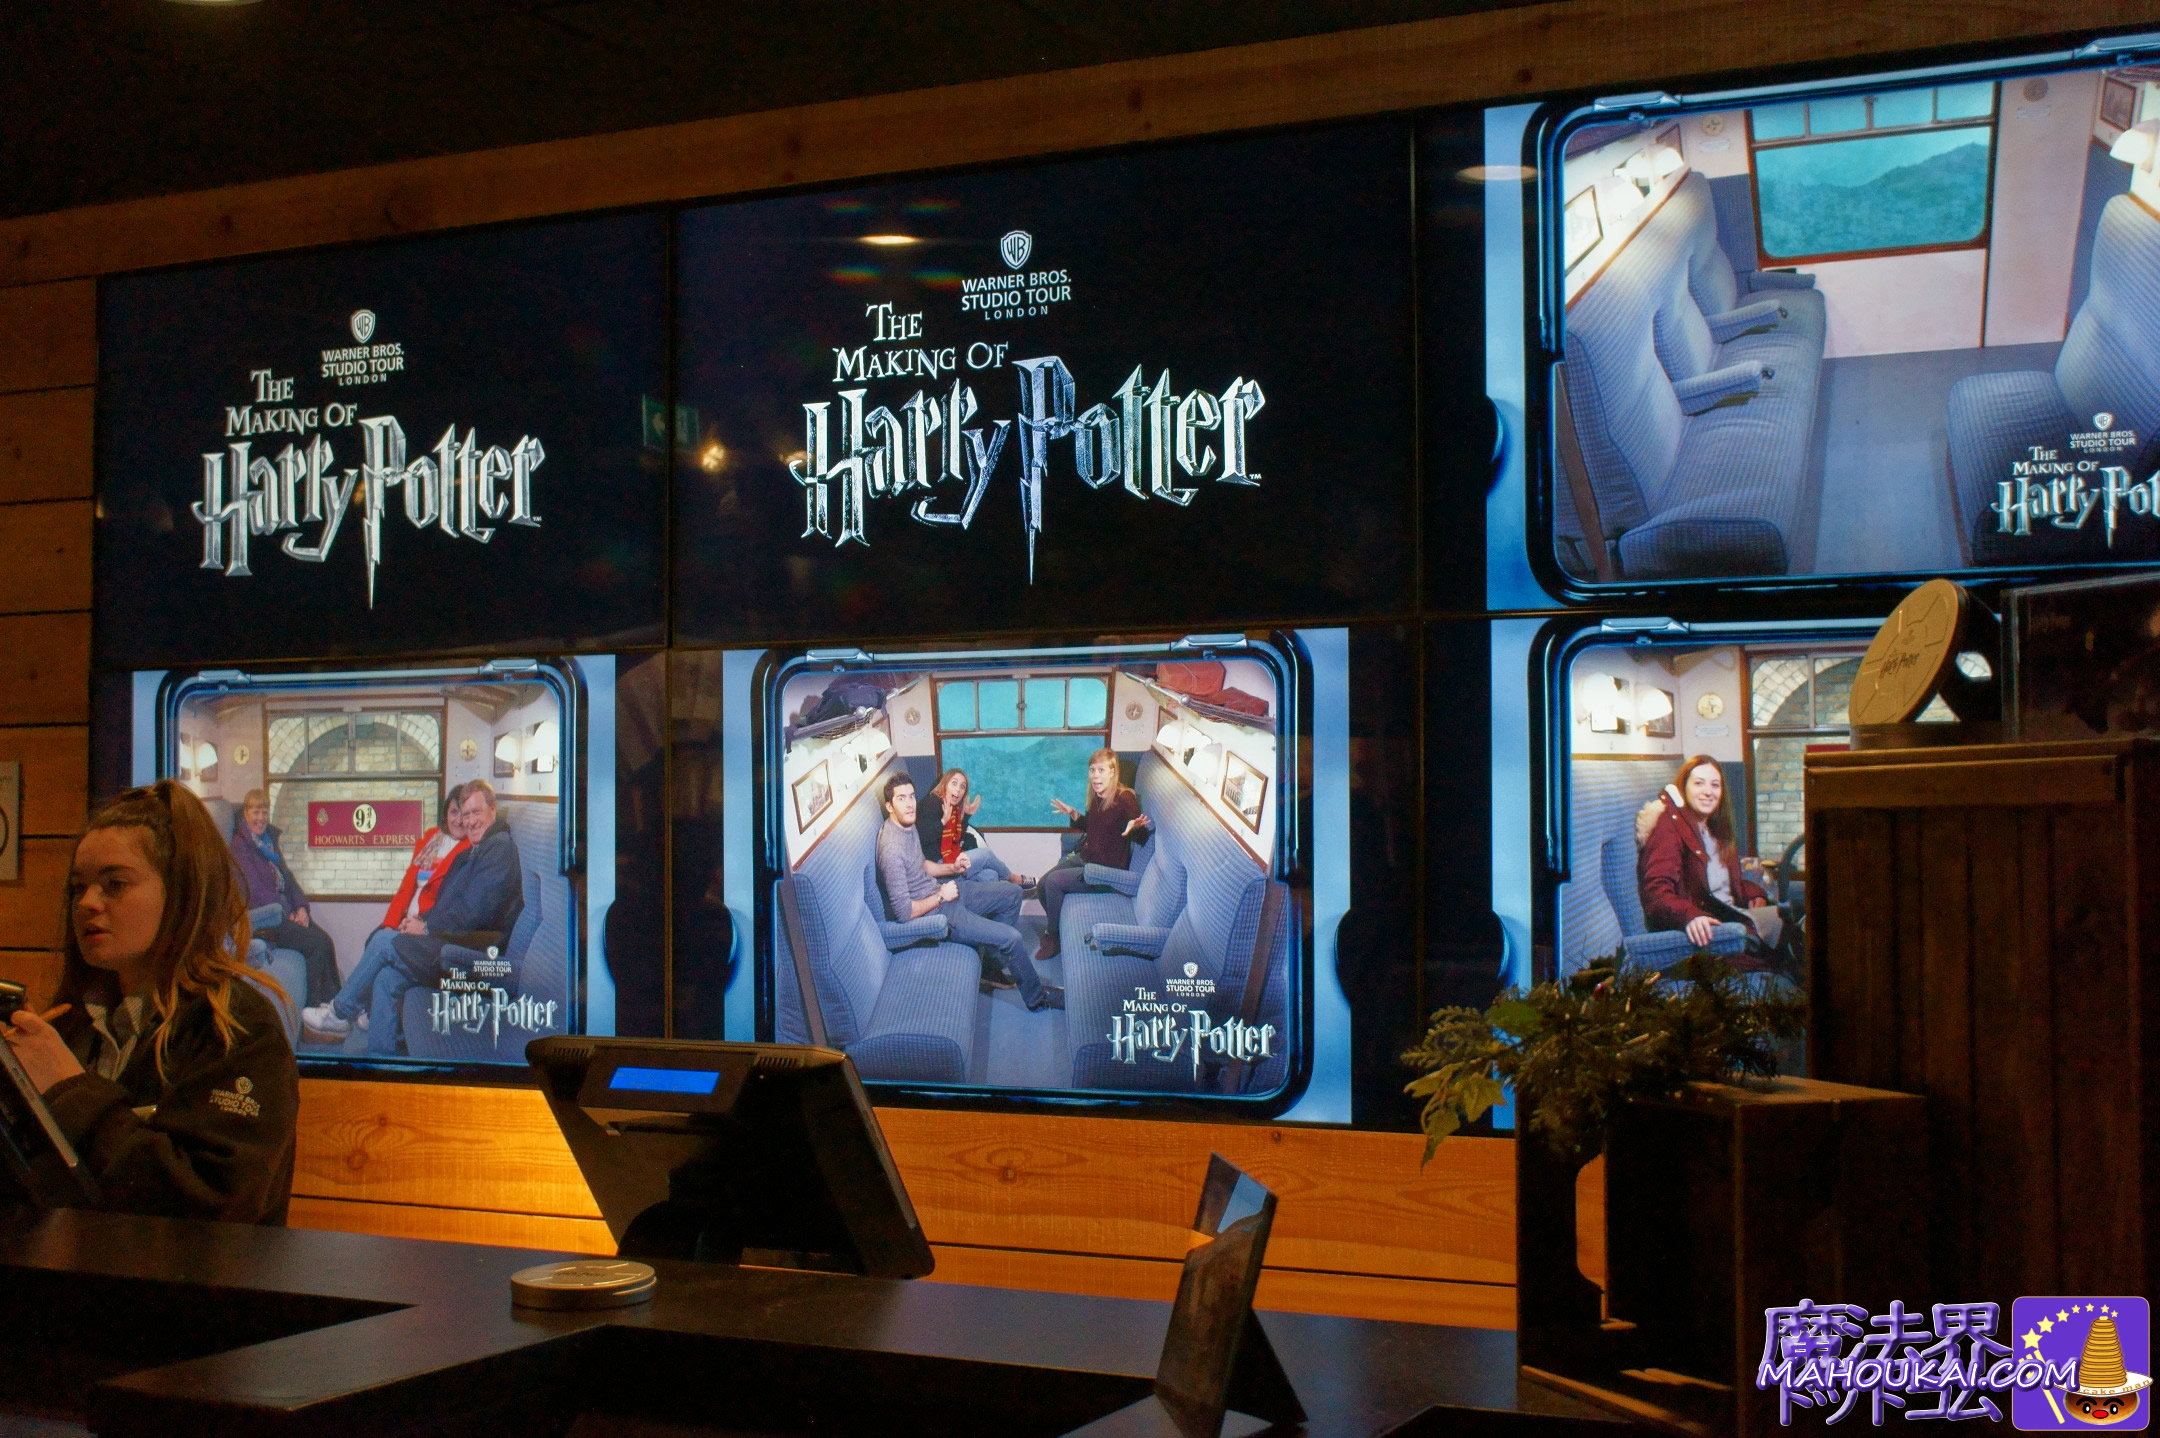 Photo purchase counter at the Hogwarts Express photo booth.